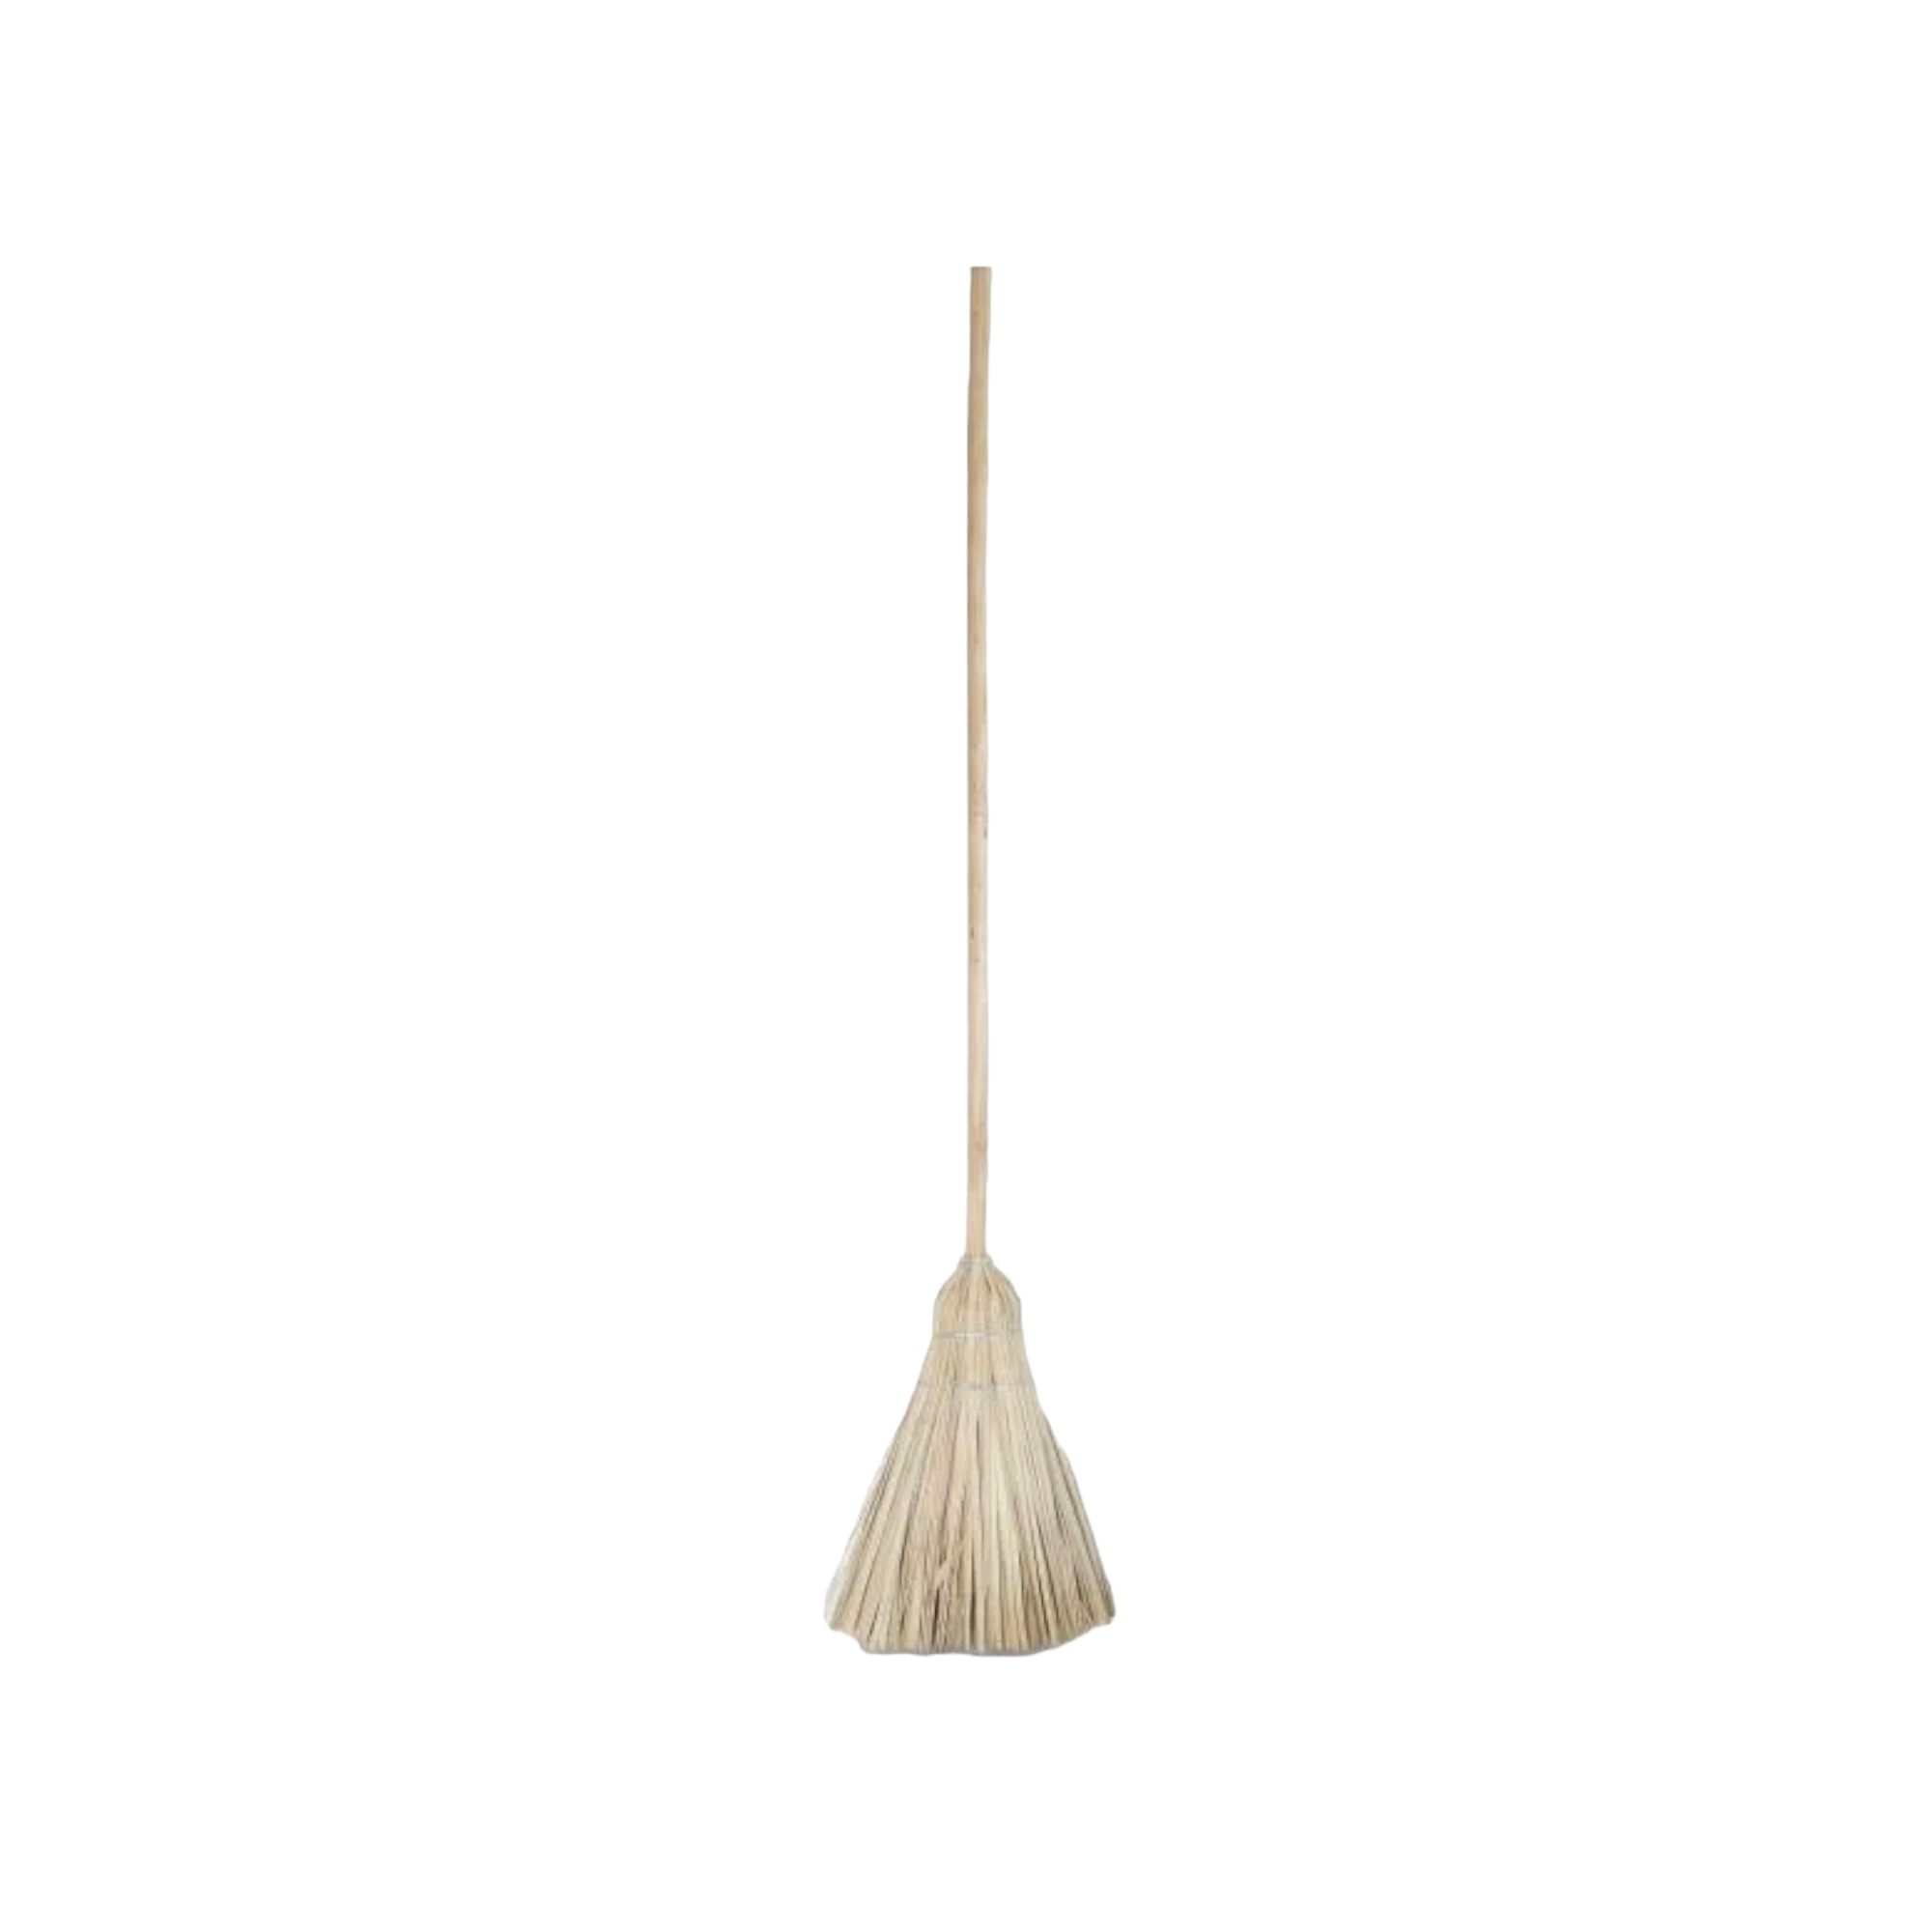 Grass Broom with Wooden Handle